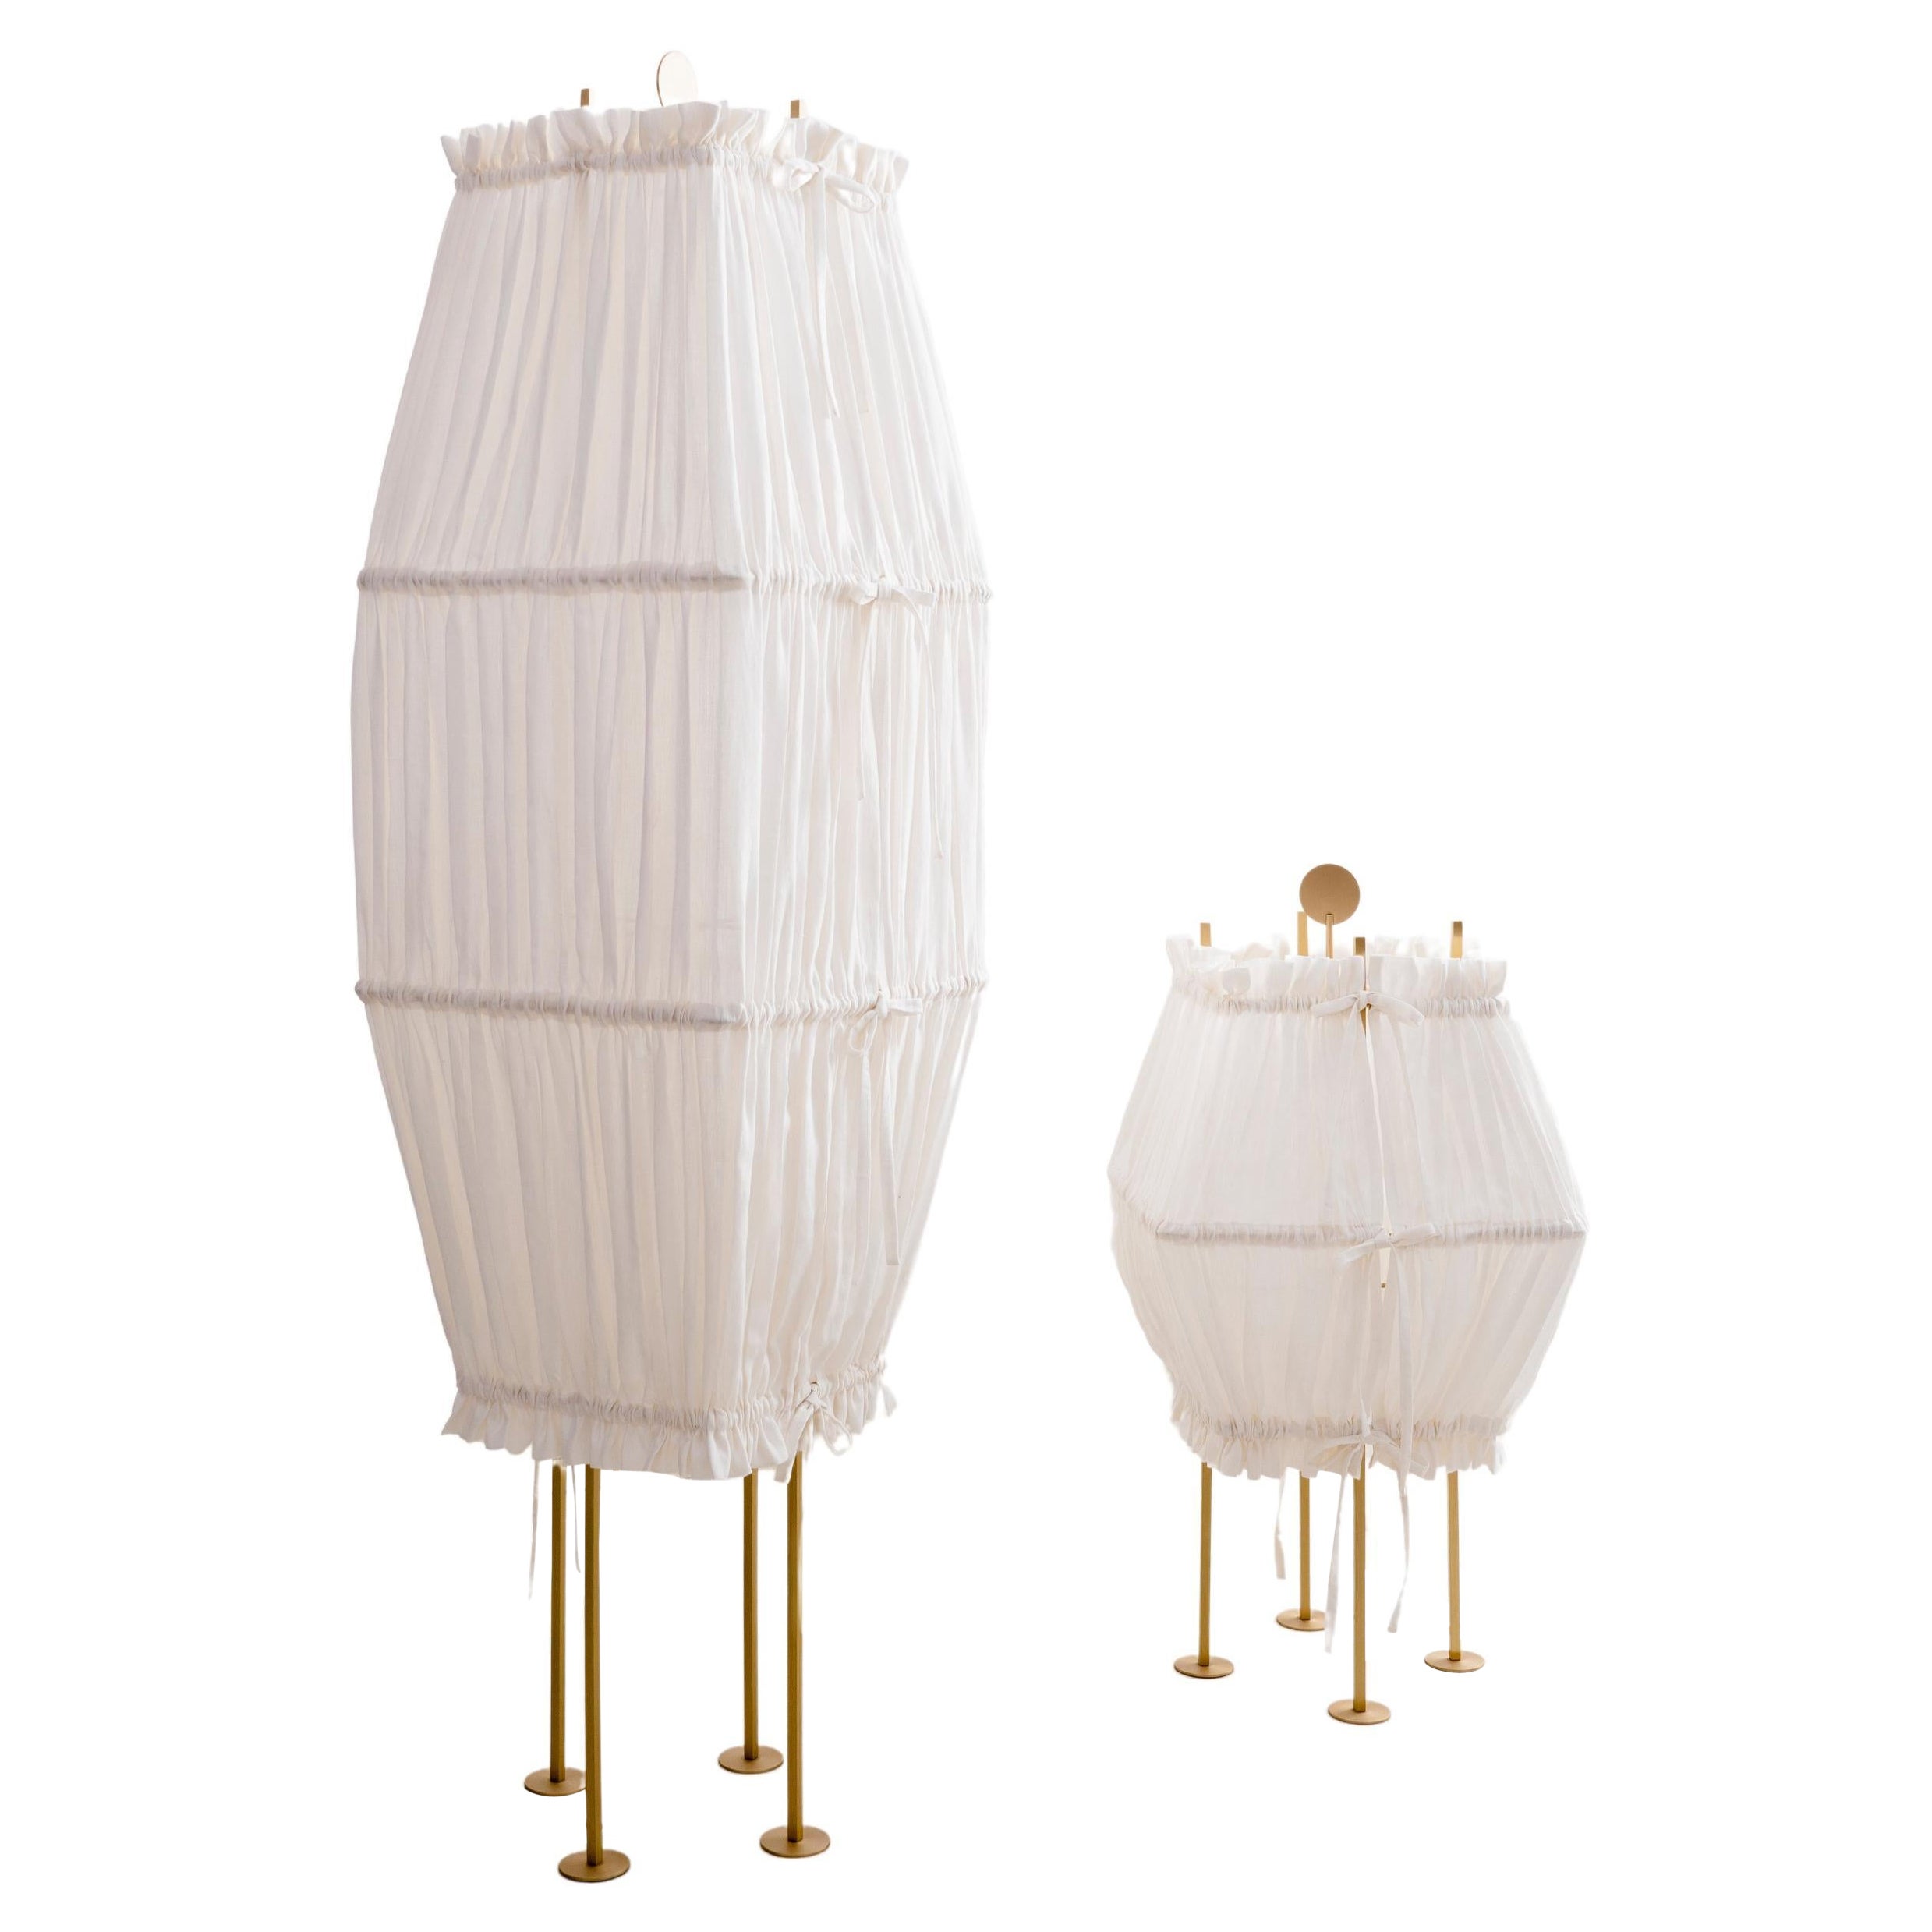 Set of 2 Presenza Floor Lamps by Agustina Bottoni